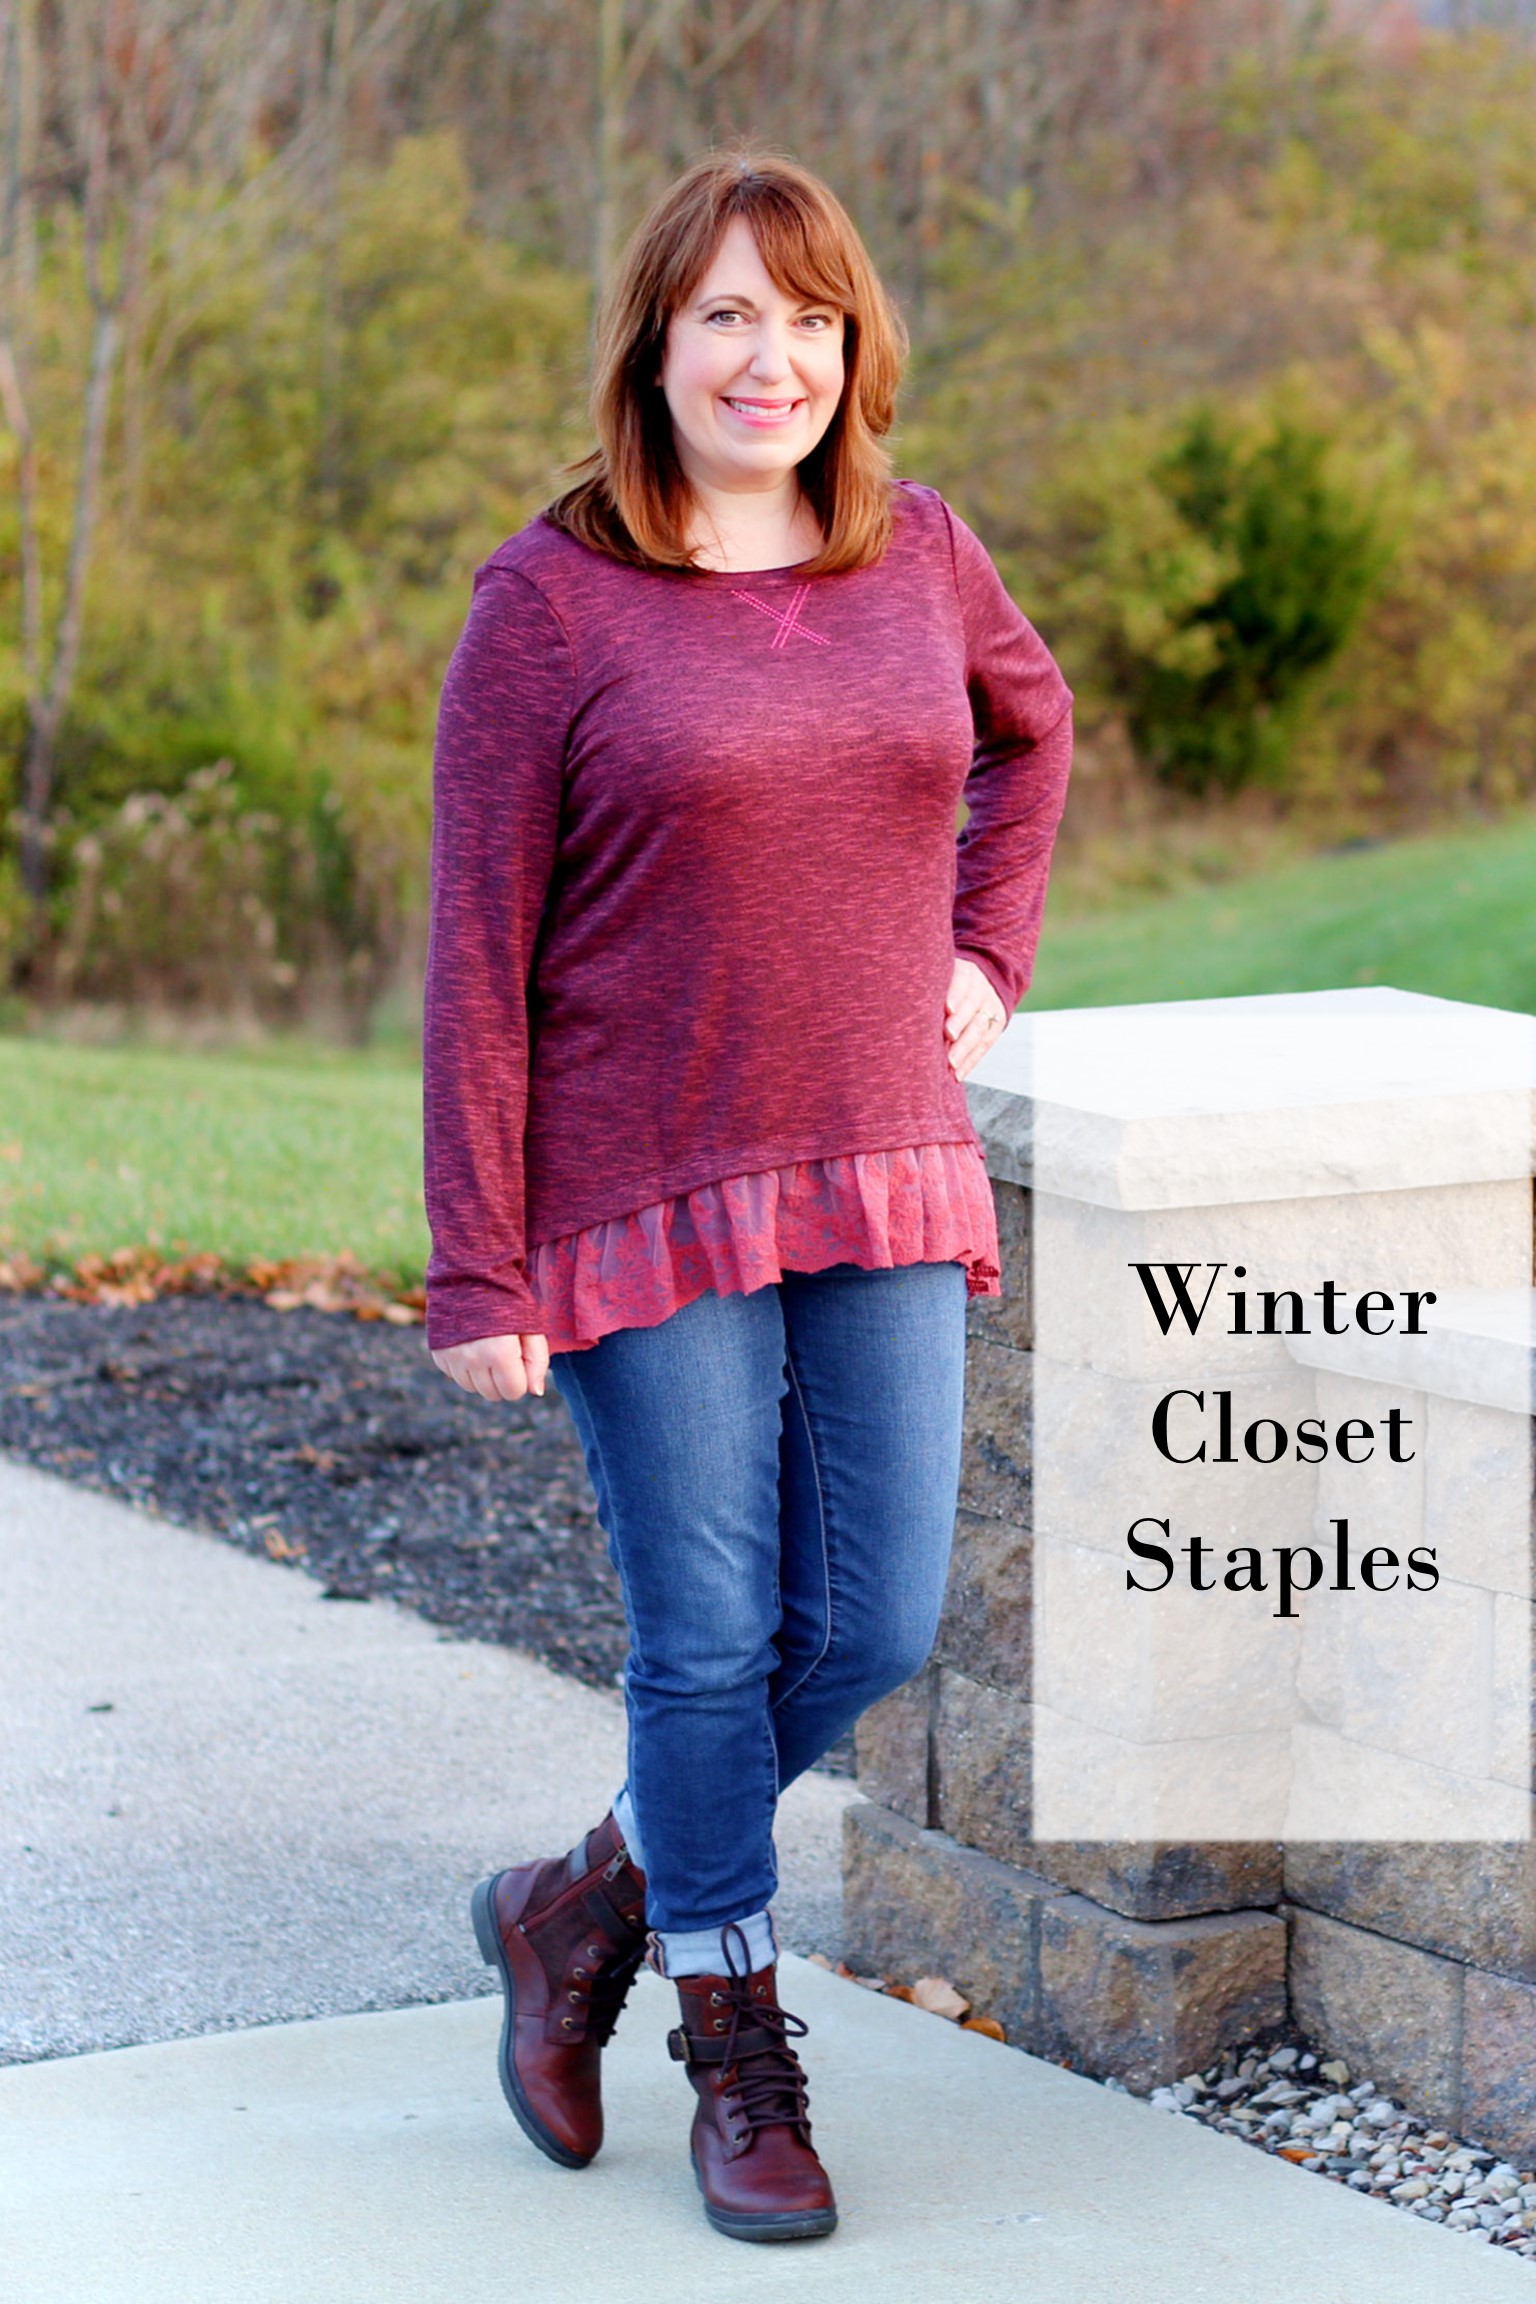 I've rounded up some essential winter items for your closet.  Read this post to see if your wardrobe is ready for the winter months ahead! #winterwardrobe #winterstaples #winteroutfits #fashionforwomenover40